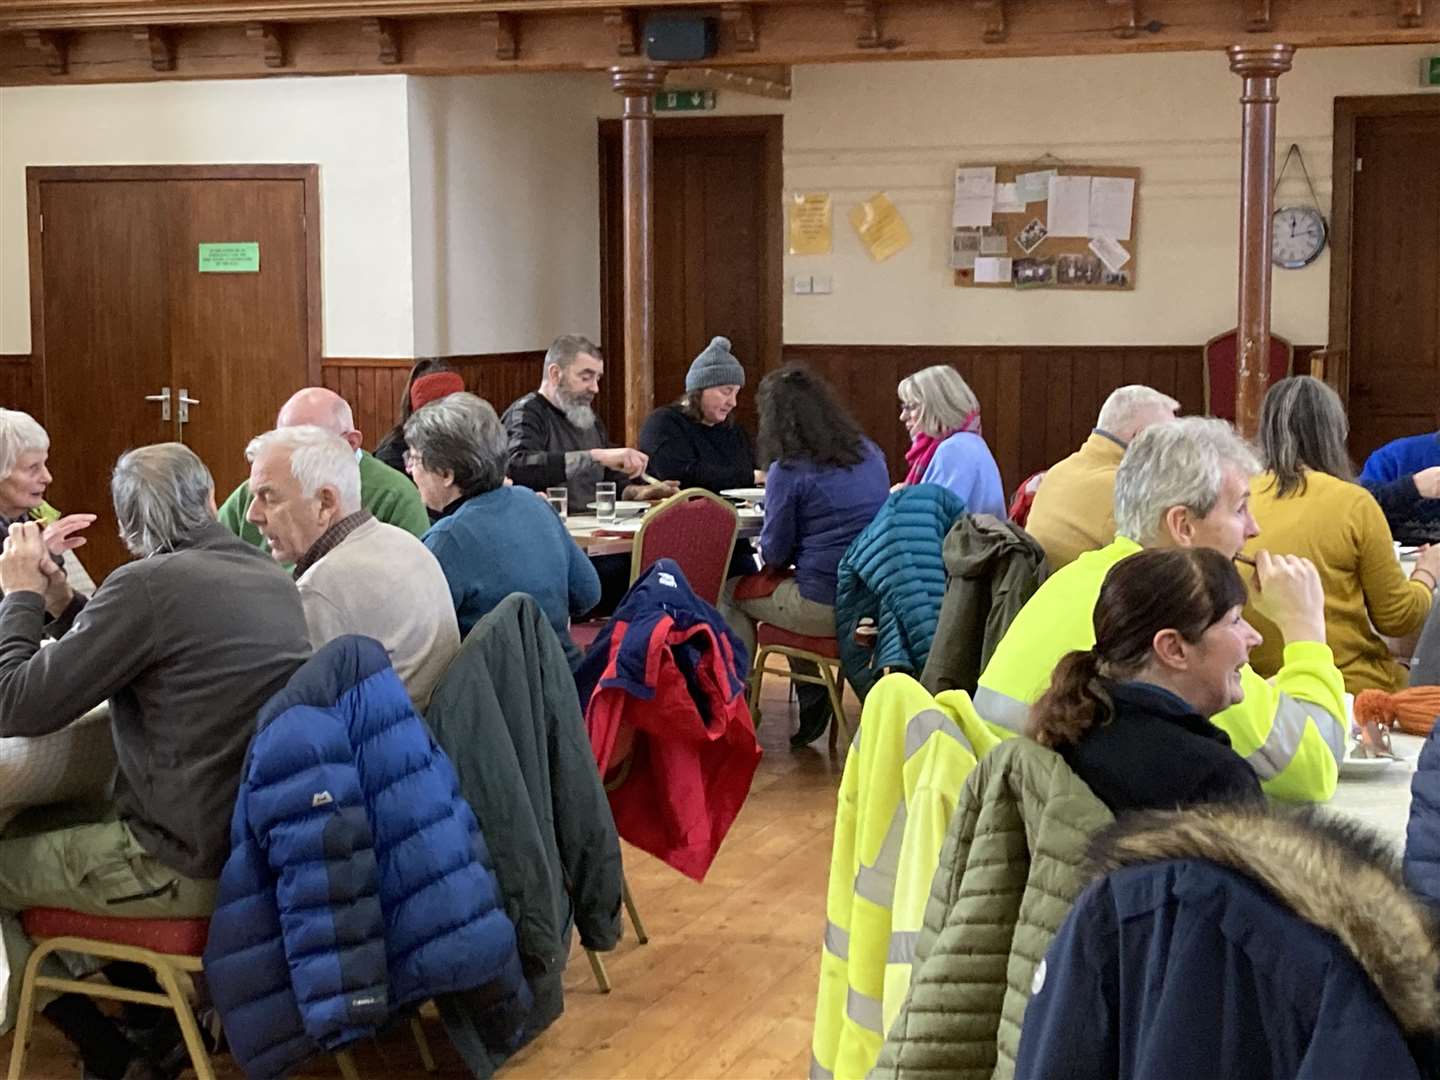 Members of the community chatting over soup in the village hall.